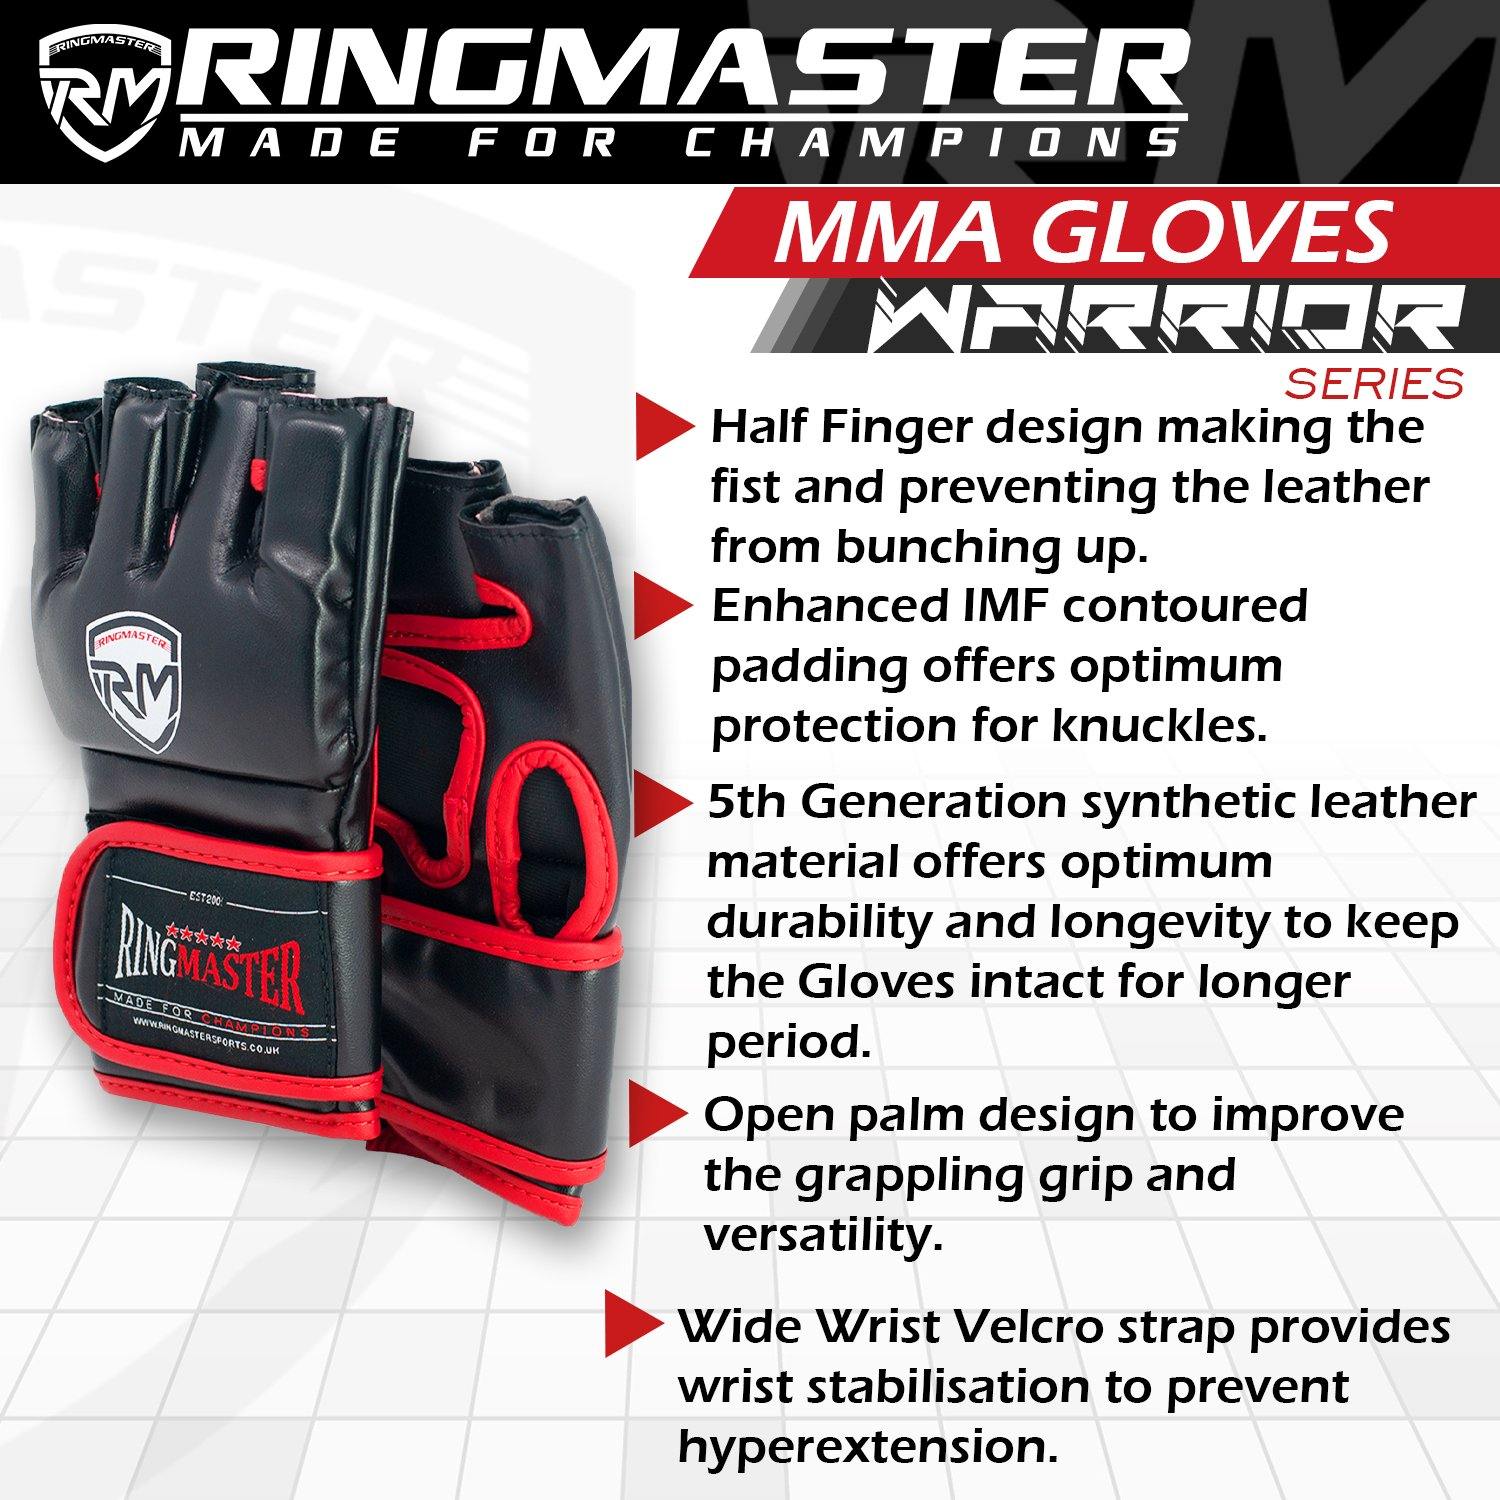 MMA & BJJ Equipment - MMA Gloves, Pads, Shorts and Vests, BJJ Suits –  RINGMASTER SPORTS - Made For Champions